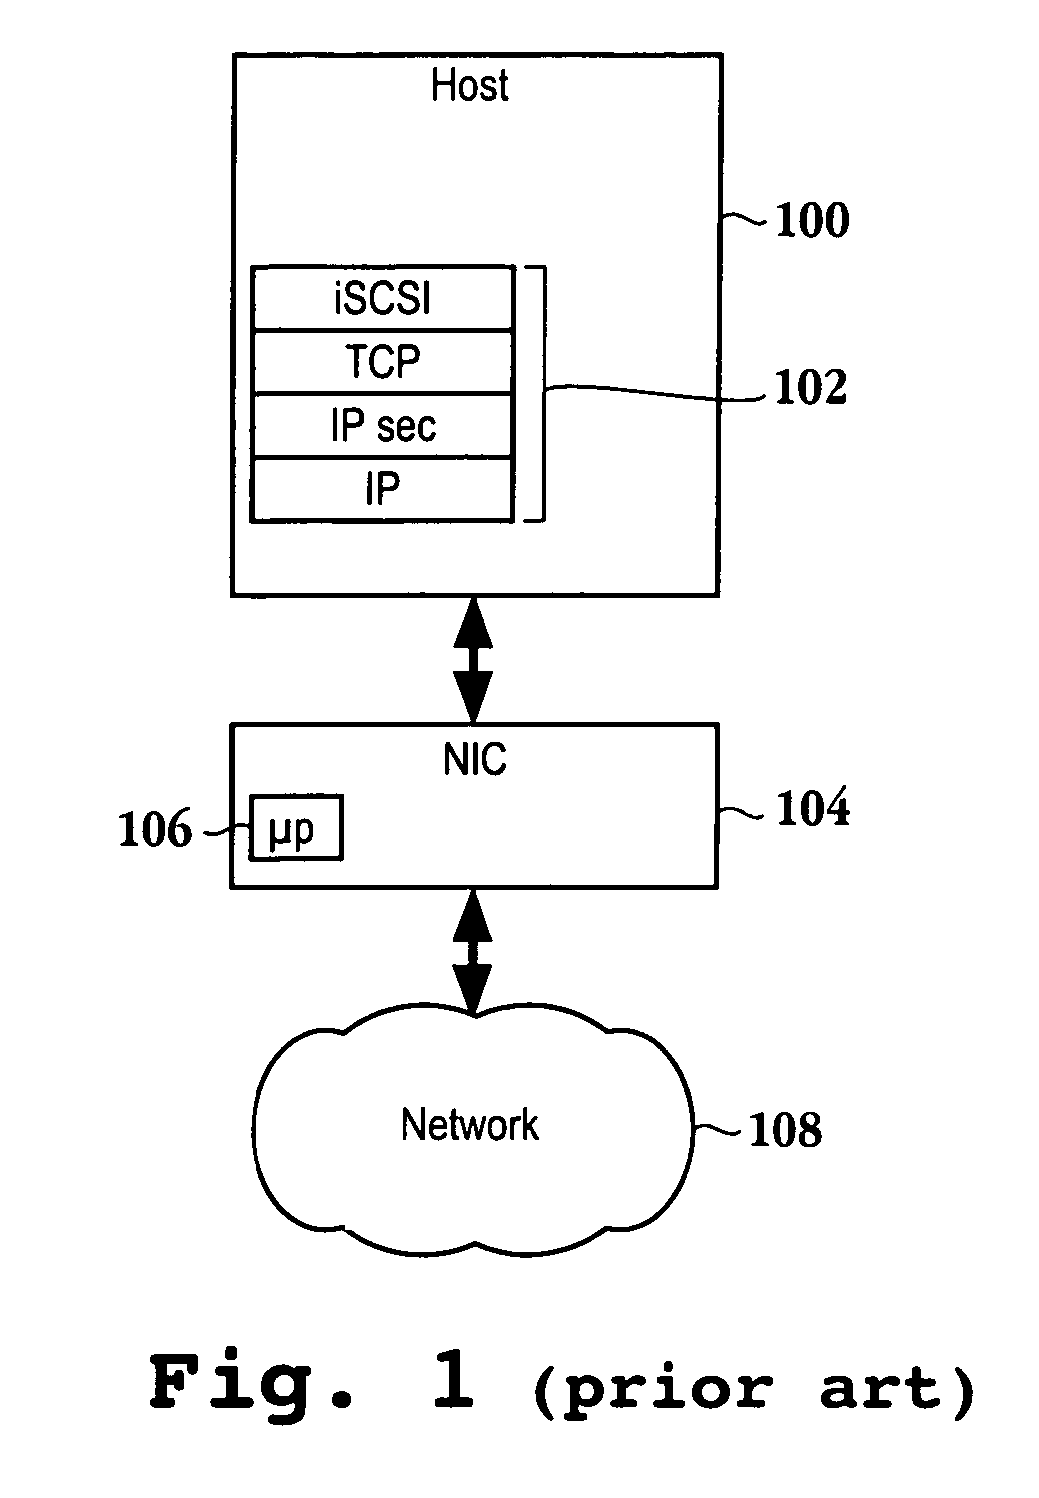 Method and apparatus for aligning operands for a processor